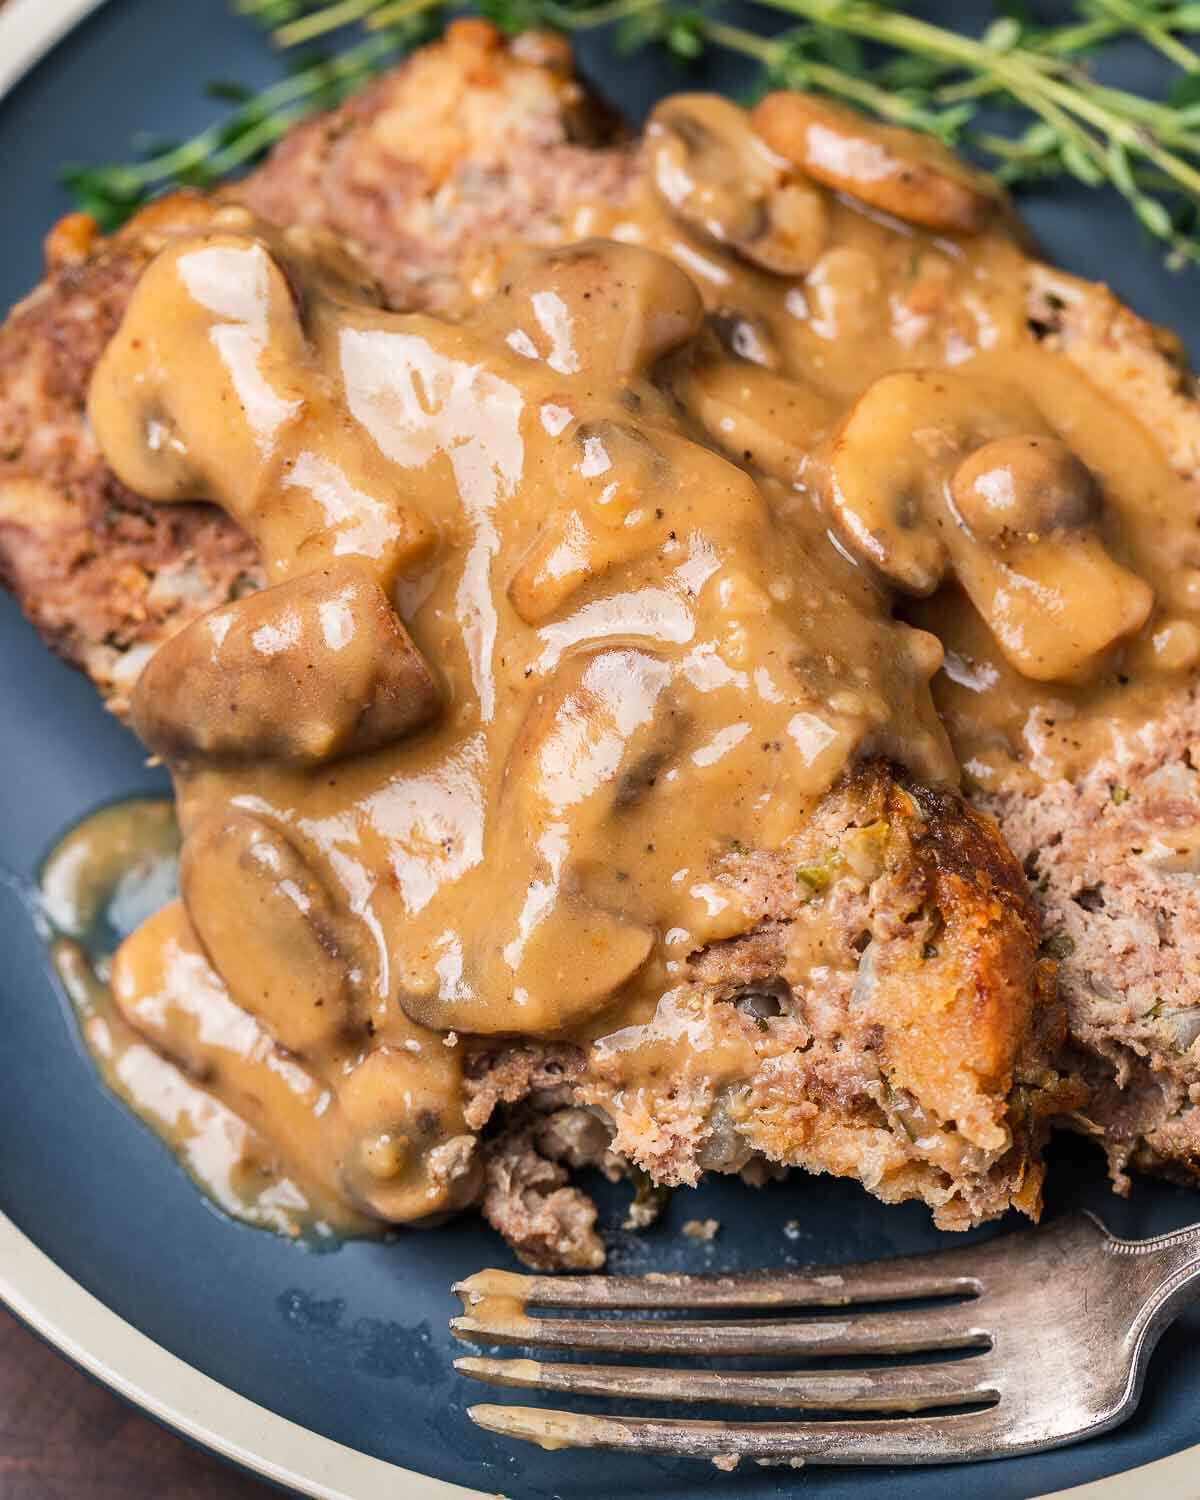 Meatloaf with gravy in blue plate.